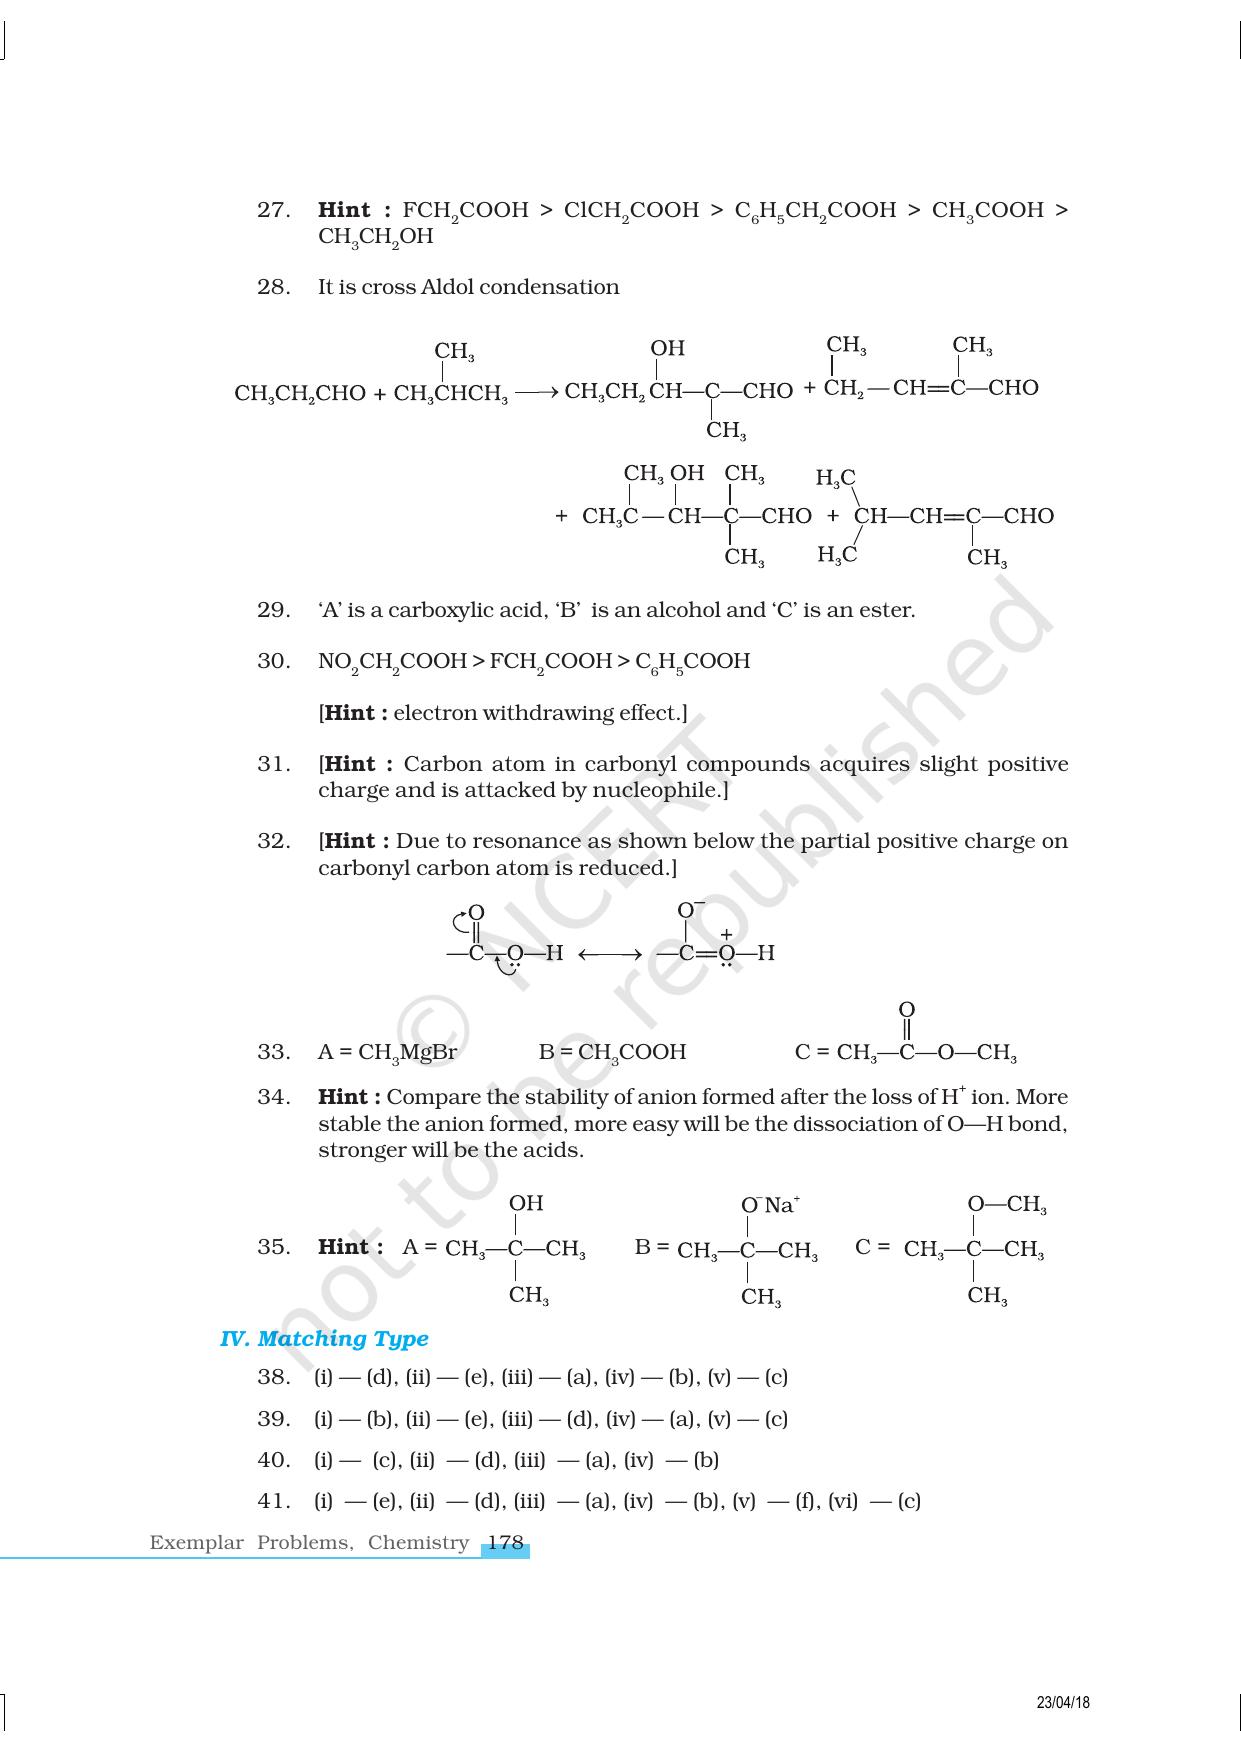 NCERT Exemplar Book for Class 12 Chemistry: Chapter 12 Aldehydes, Ketones and Carboxylic Acids - Page 11